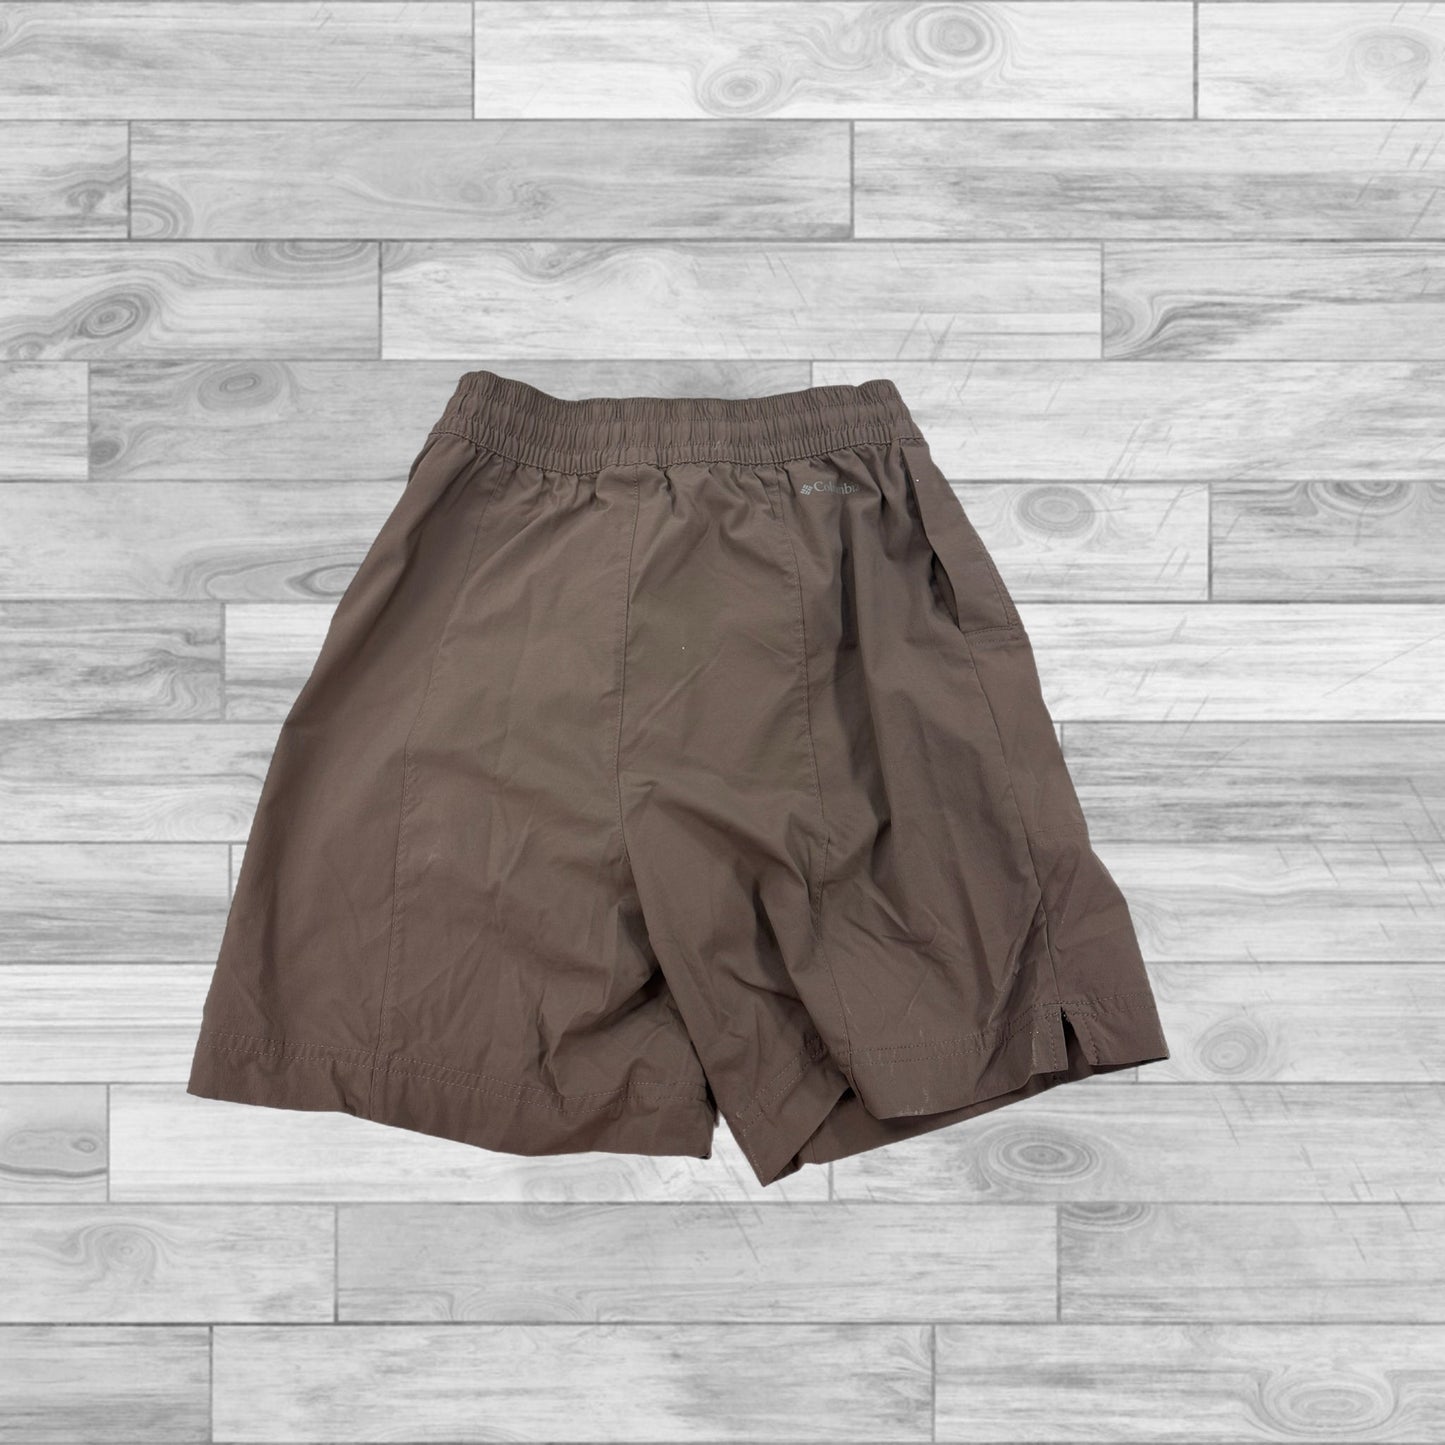 Brown Athletic Shorts Columbia, Size Xs